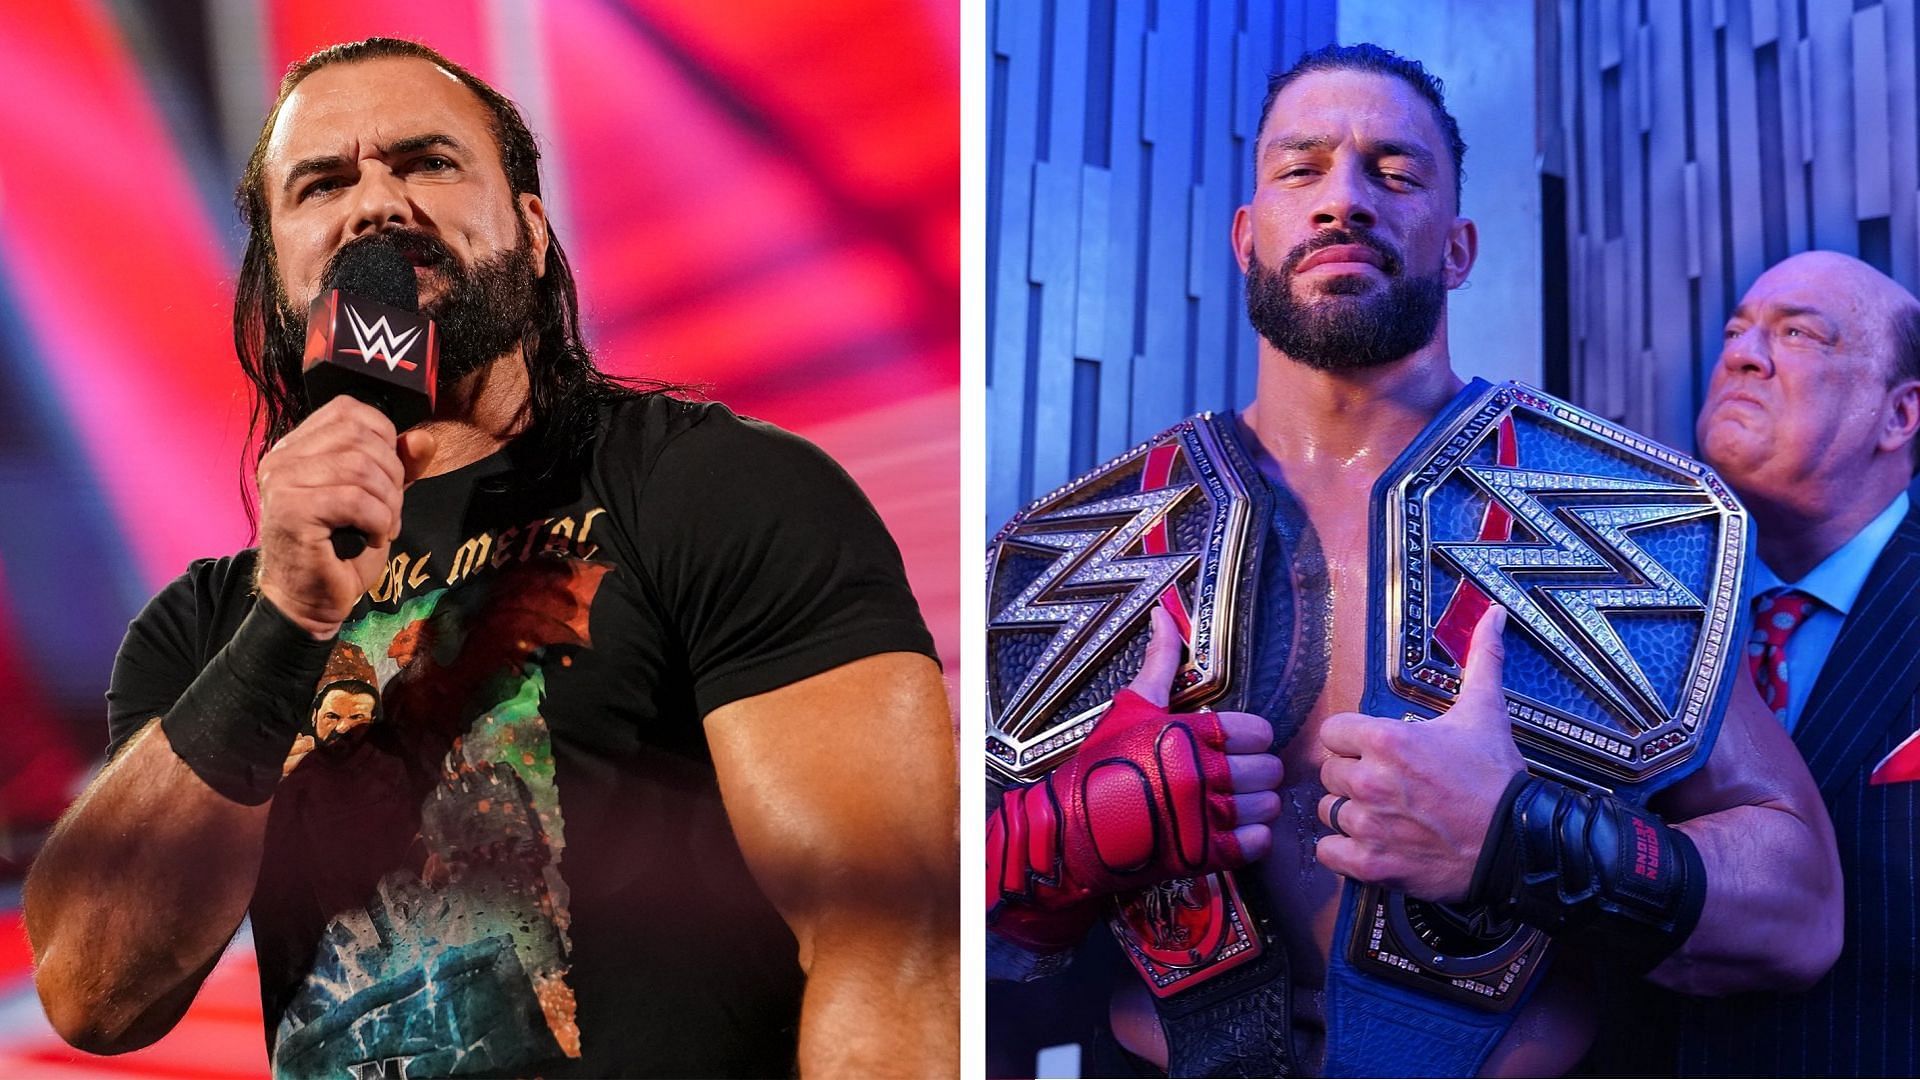 Roman Reigns and Drew McIntyre are set to go face-to-face on WWE SmackDown